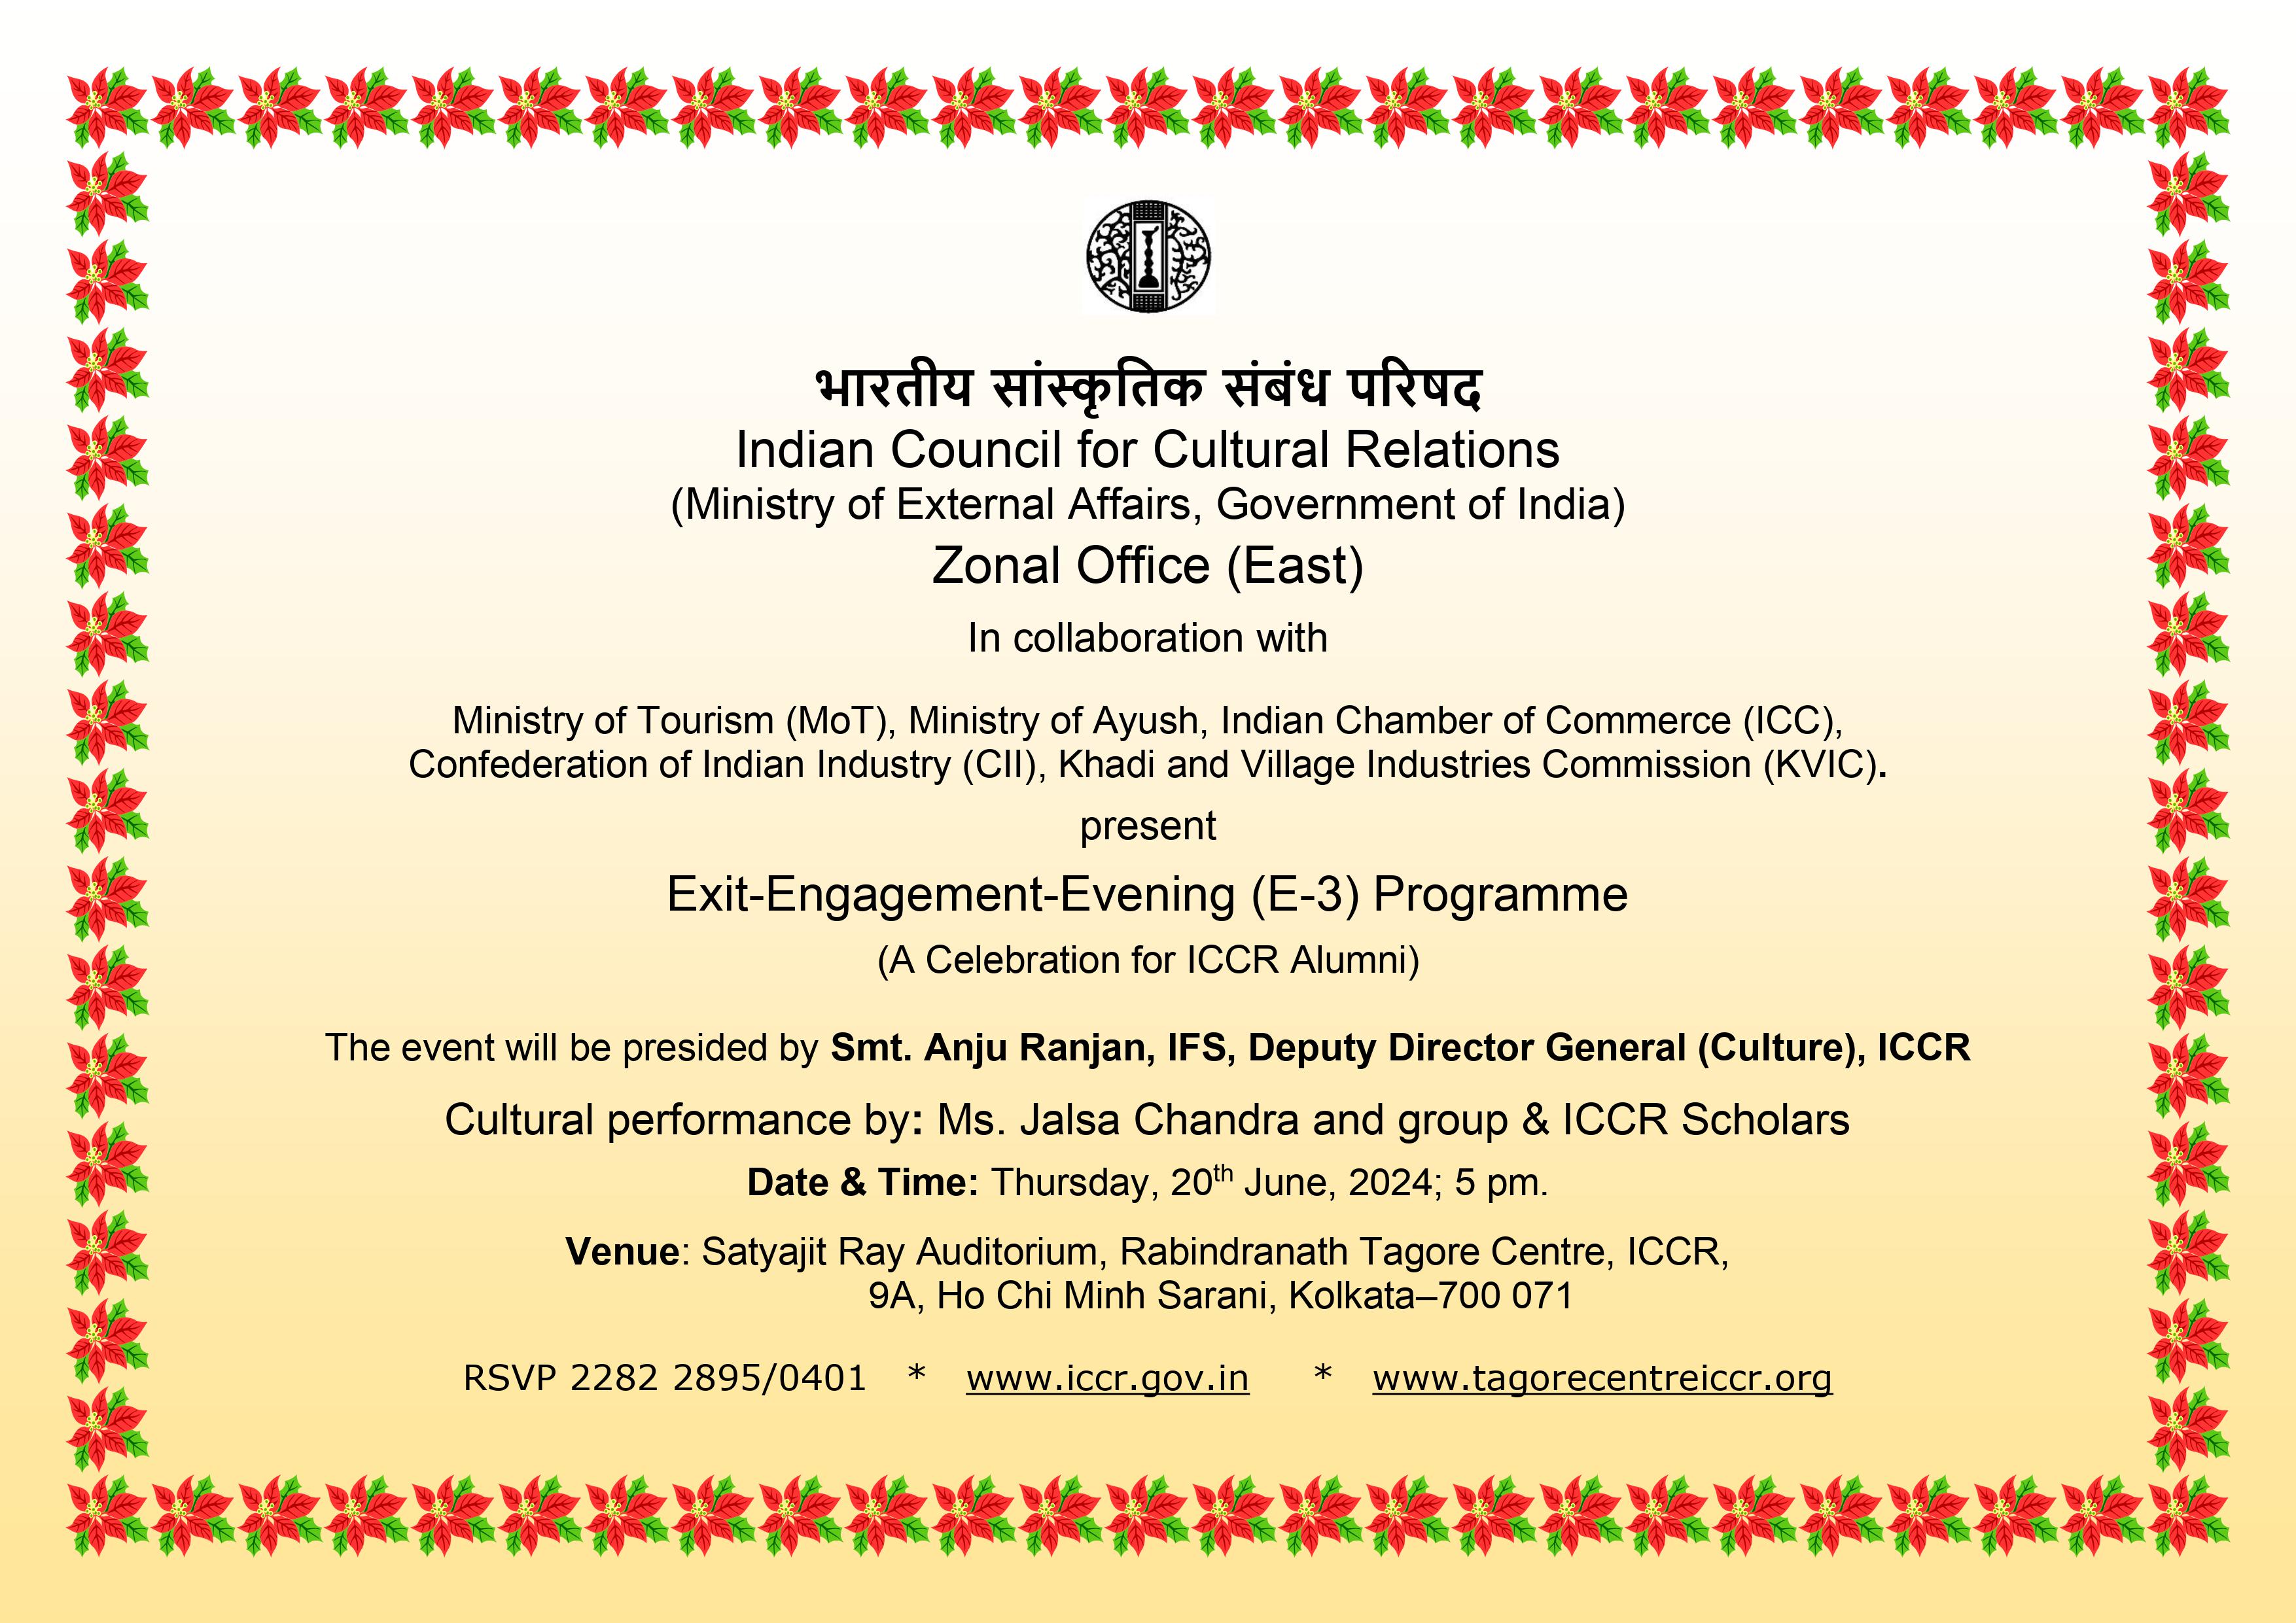 Invitation card for Exit-Engagement-Evening (E-3) Programme, 2024 by ICCR Kolkata